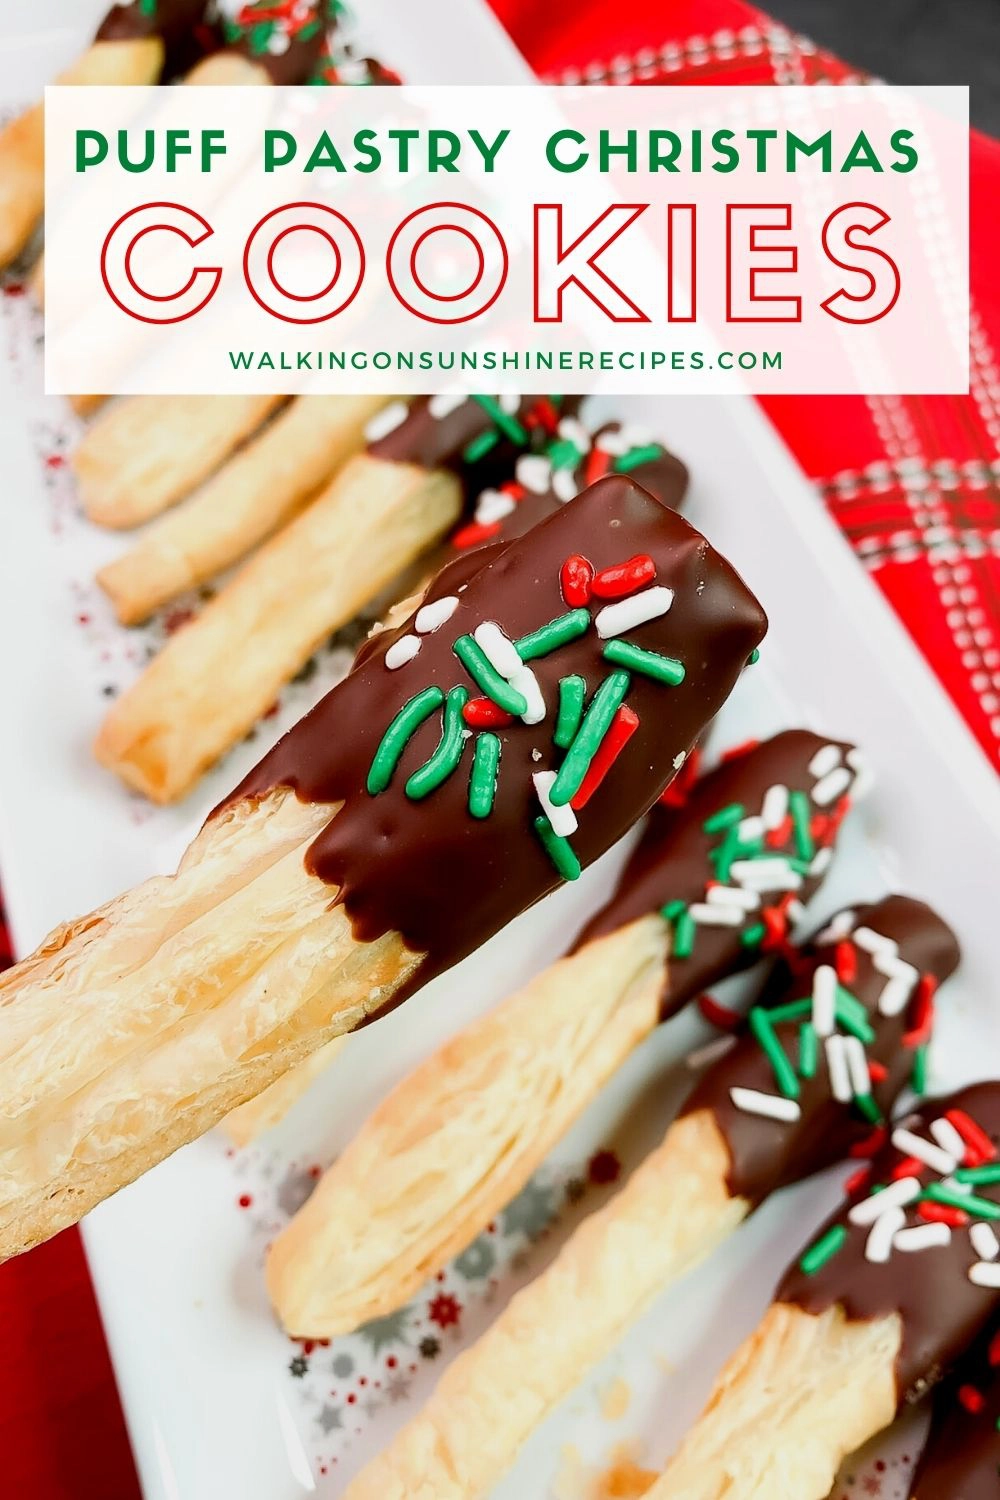 Puff pastry sticks dipped in melted chocolate with sprinkles. 